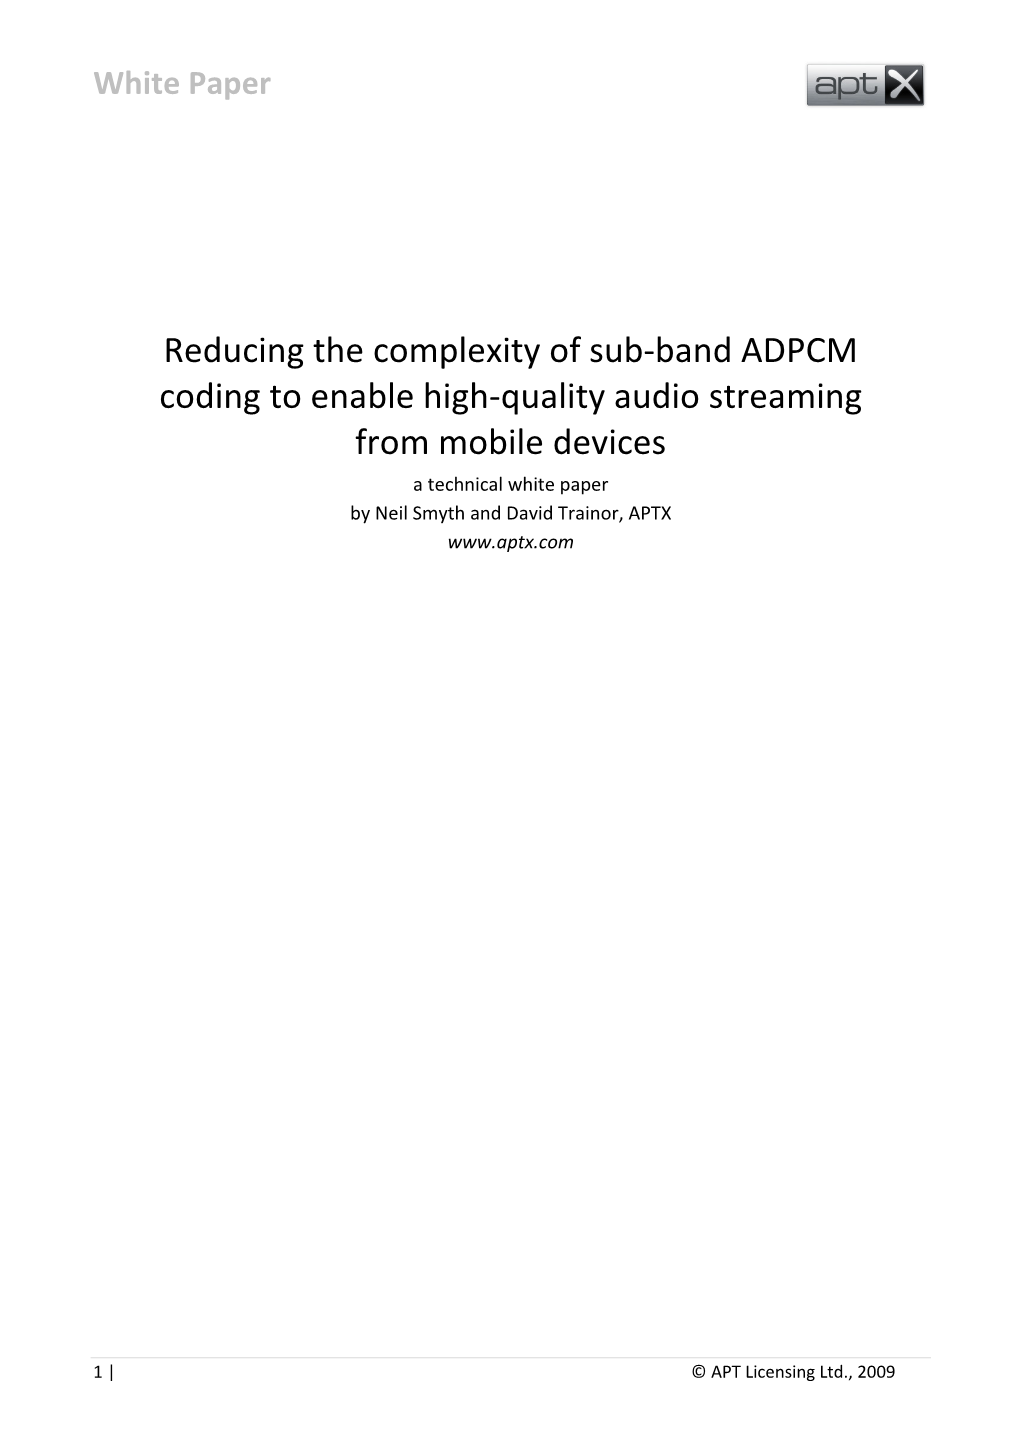 Reducing the Complexity of Sub-Band ADPCM Coding to Enable High